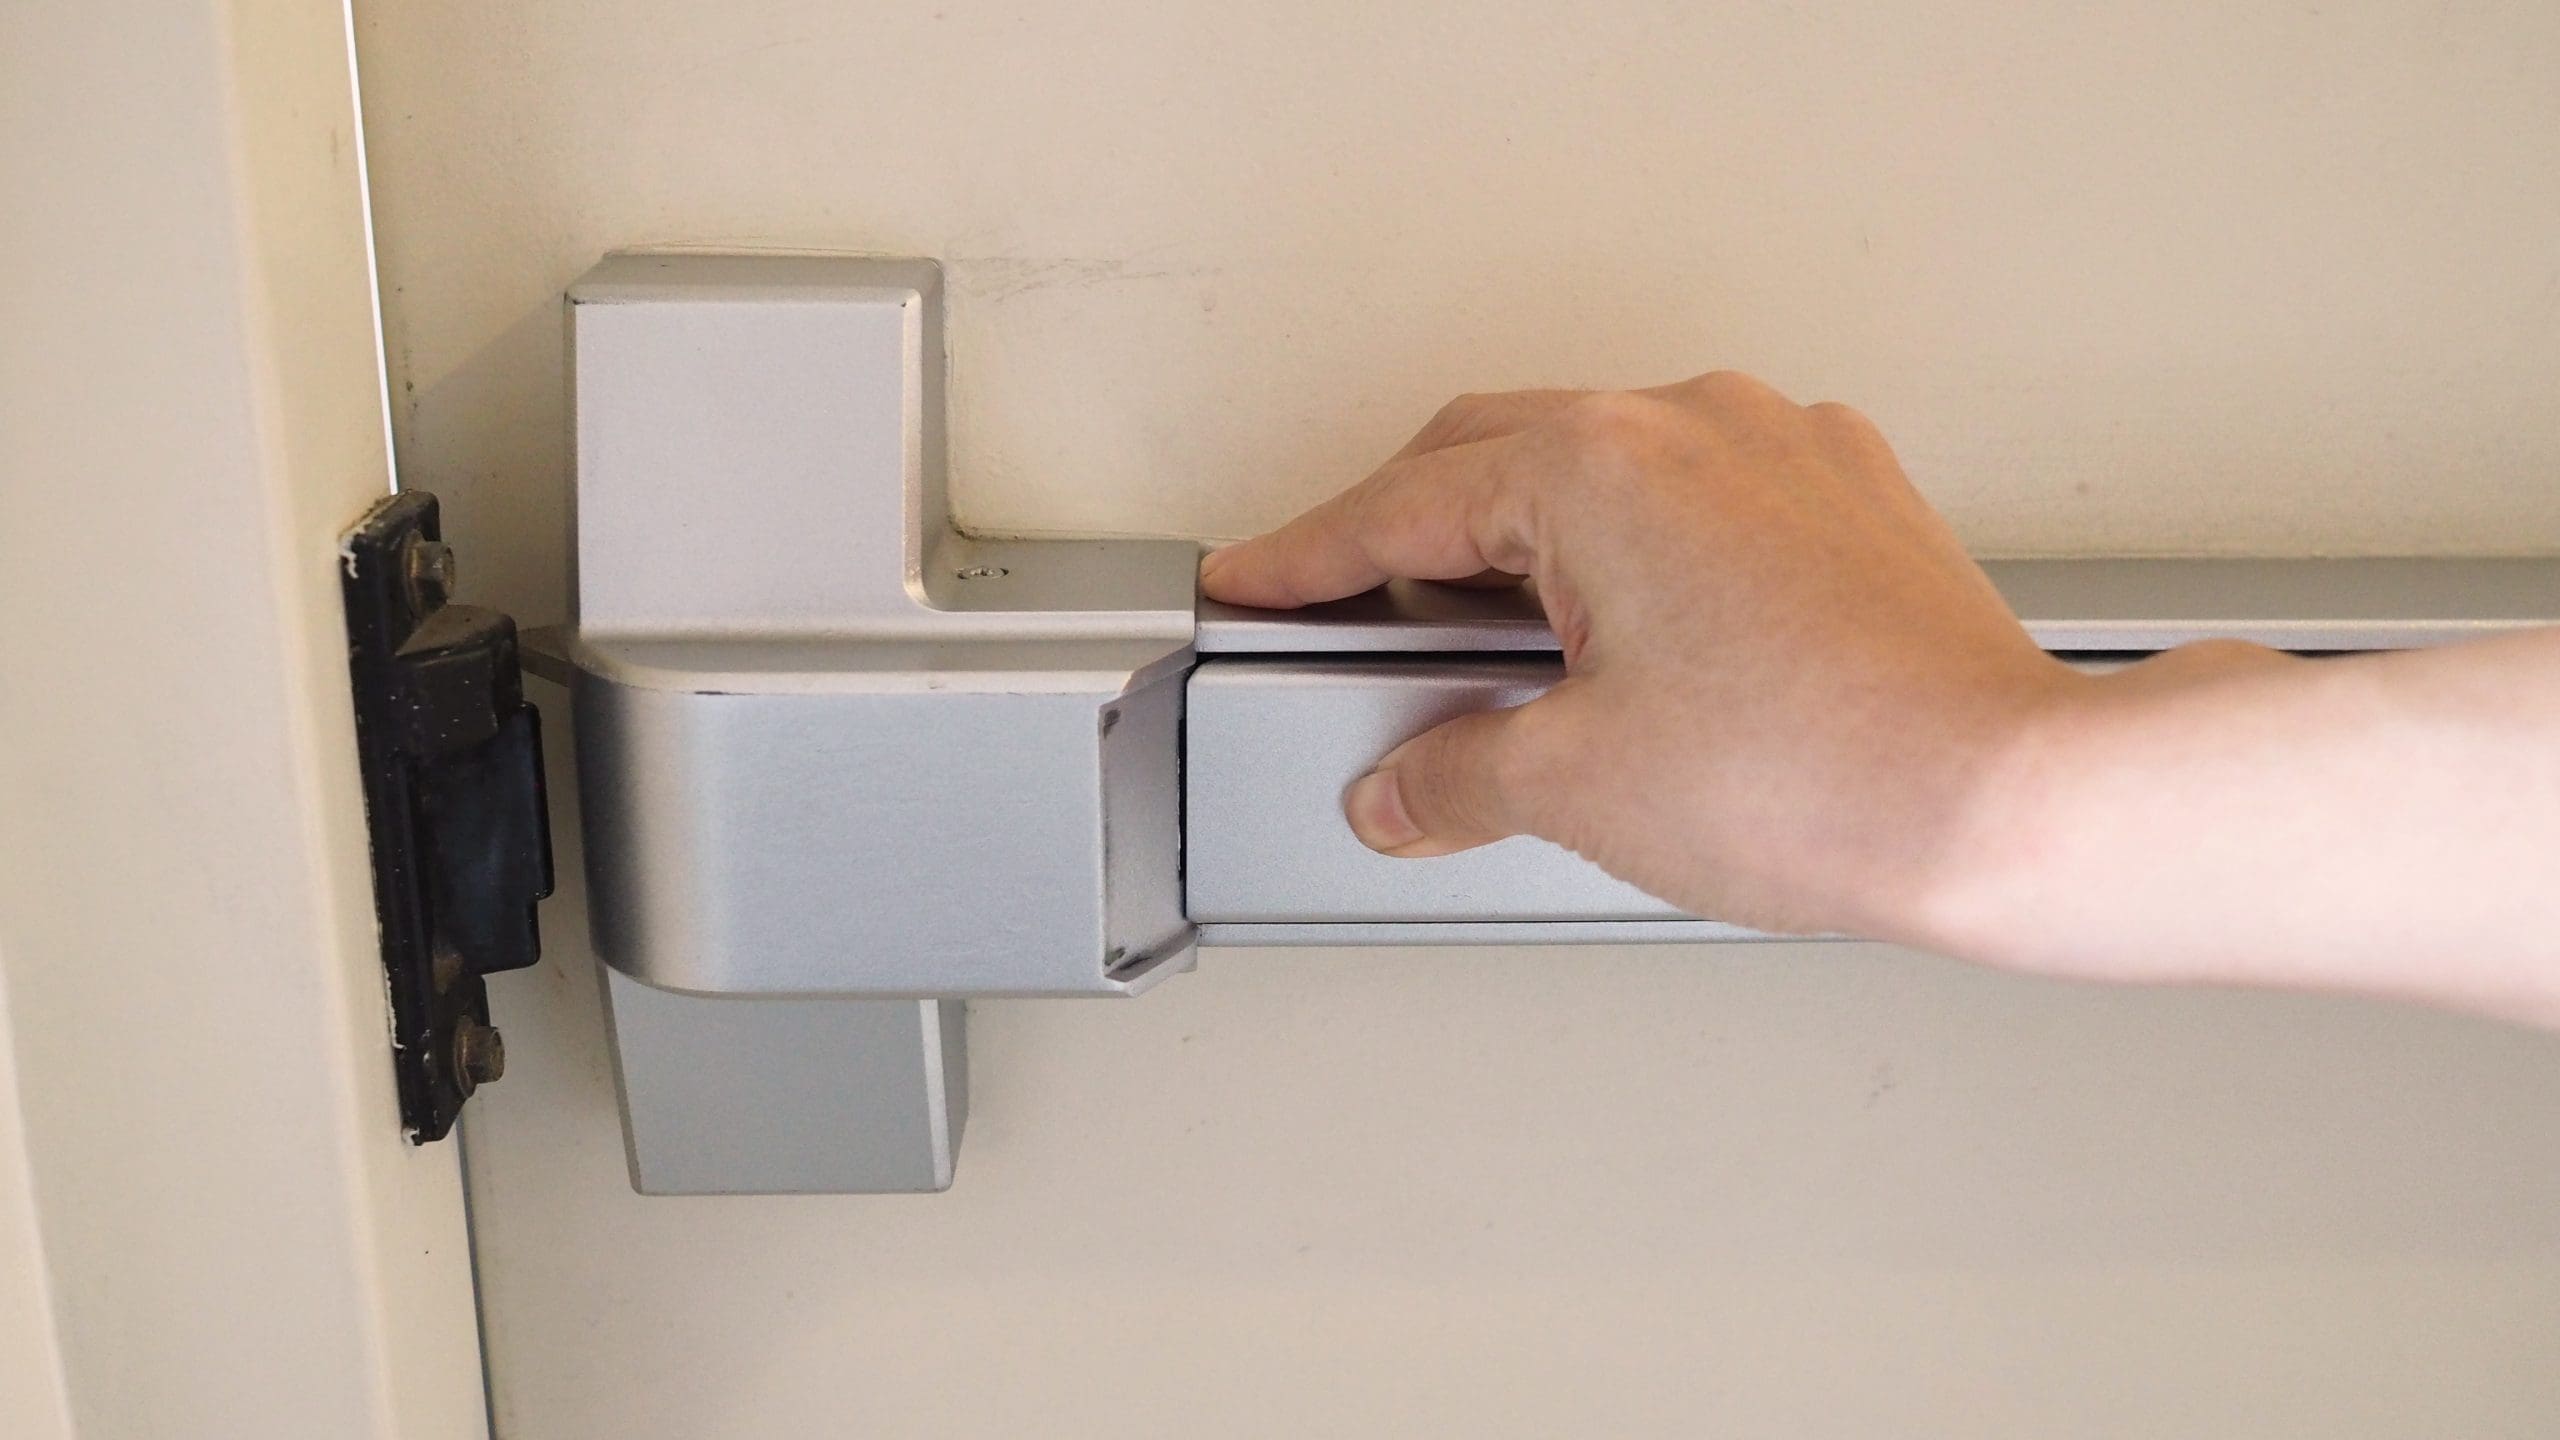 Featured image for “An Overview of Antimicrobial Door Hardware”